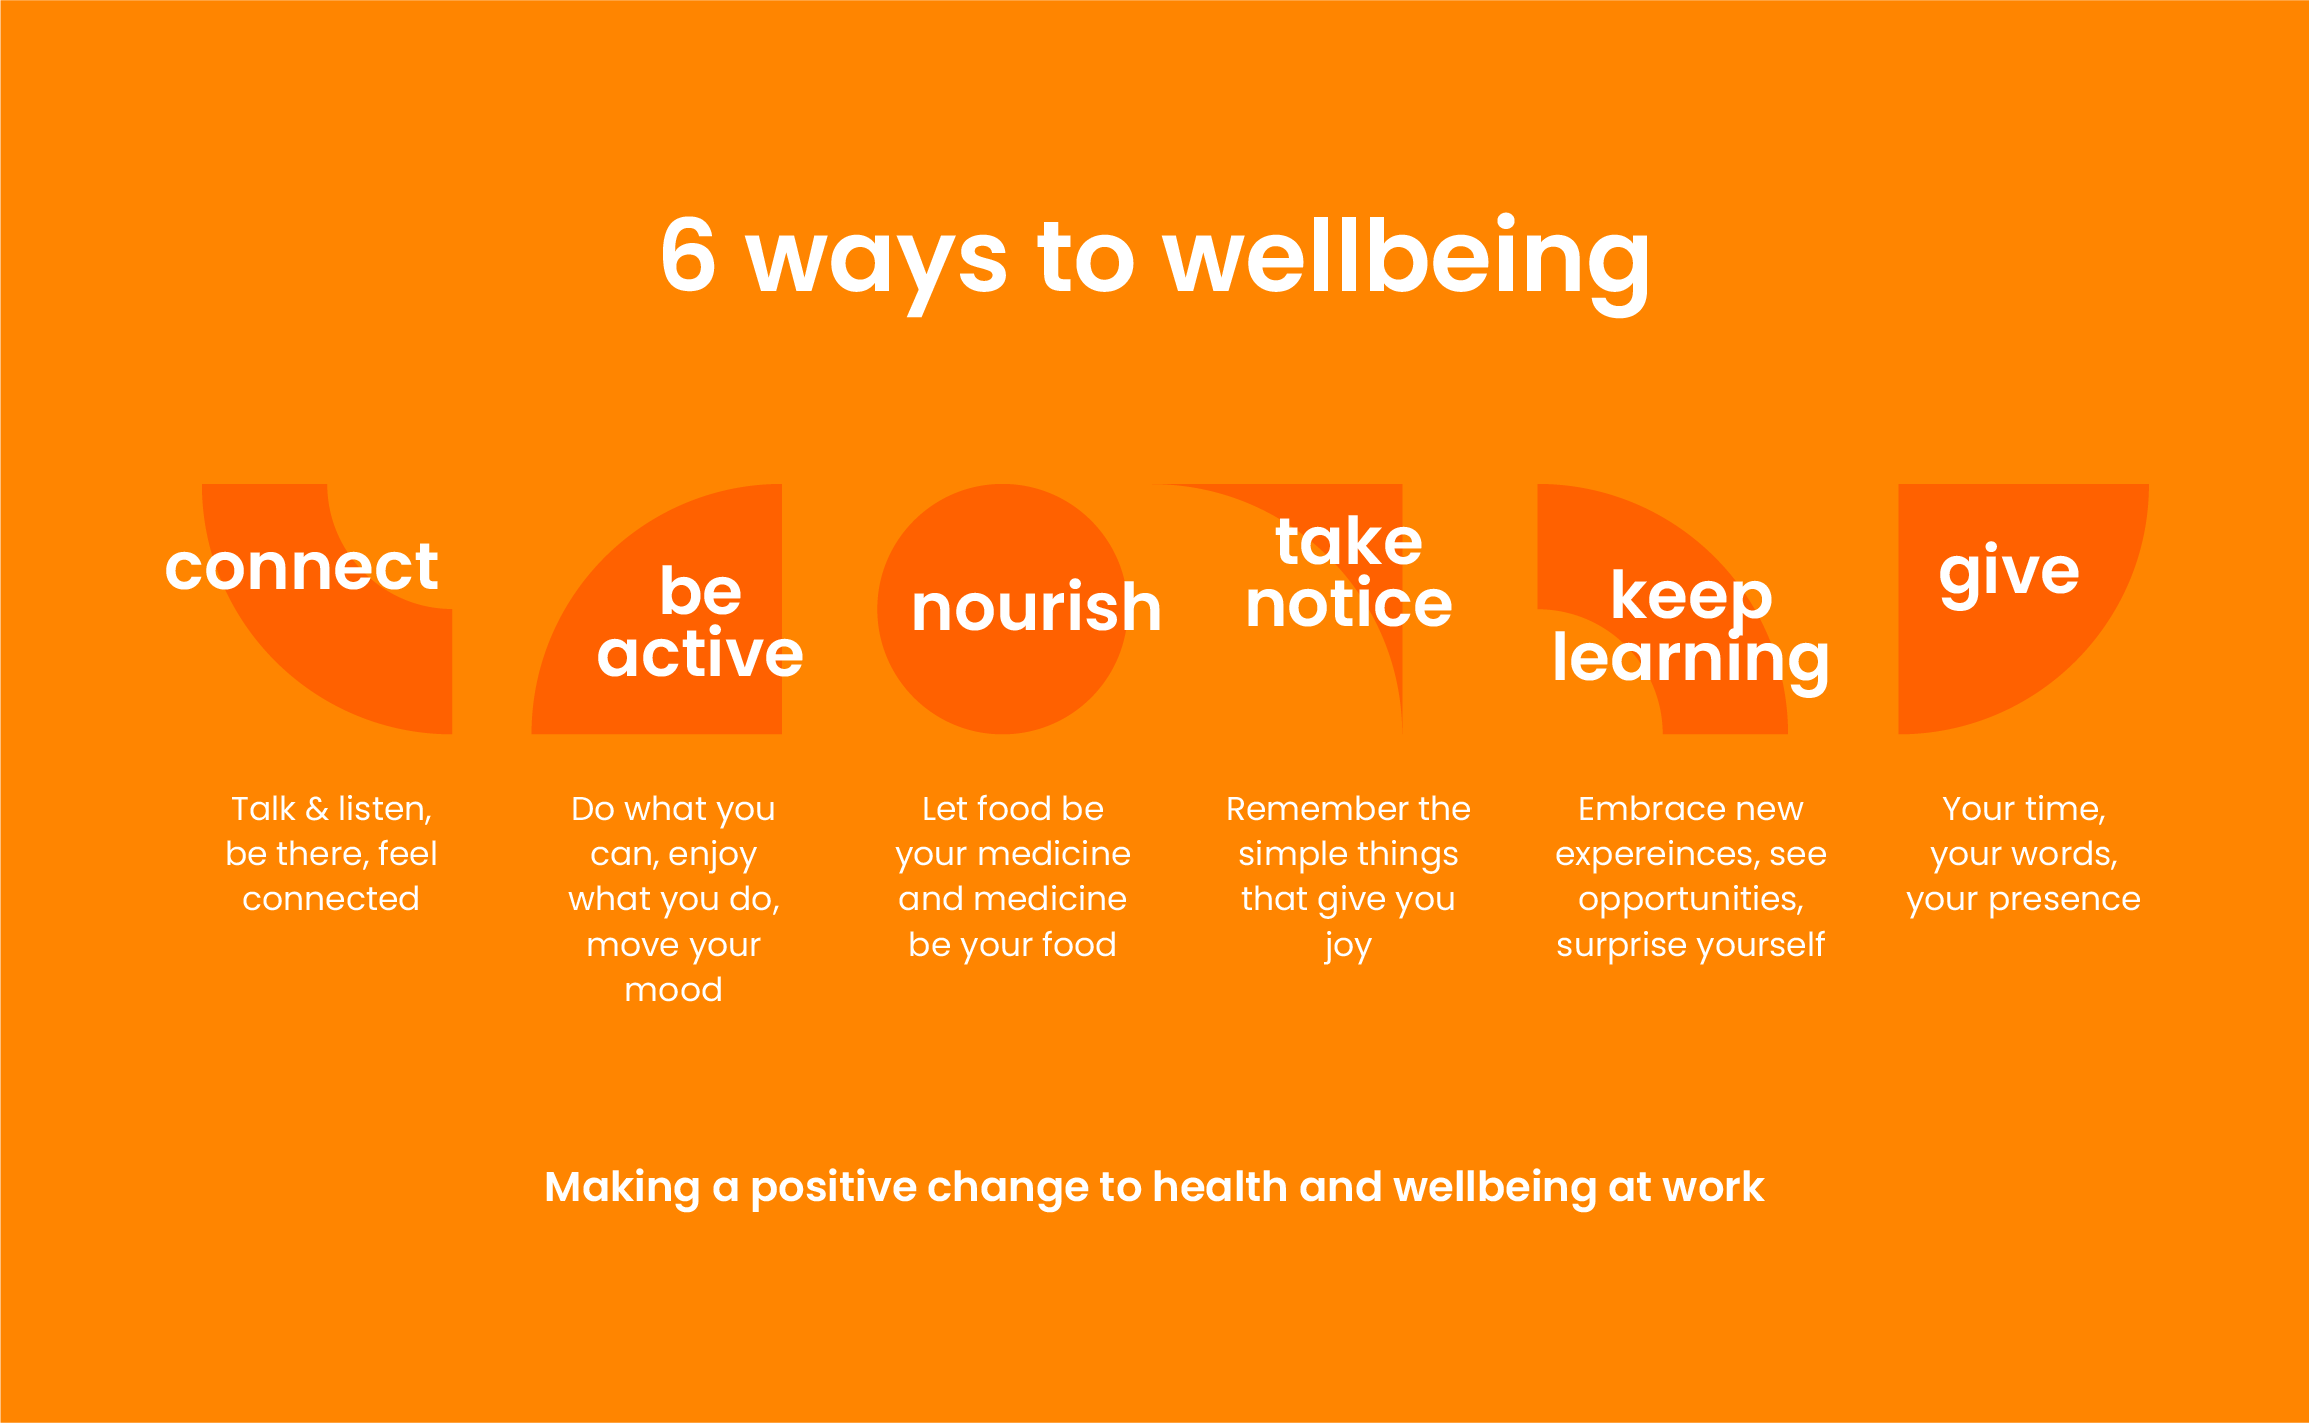 6 ways to wellbeing: connect, be active, nourish, take notice, keep learning, give